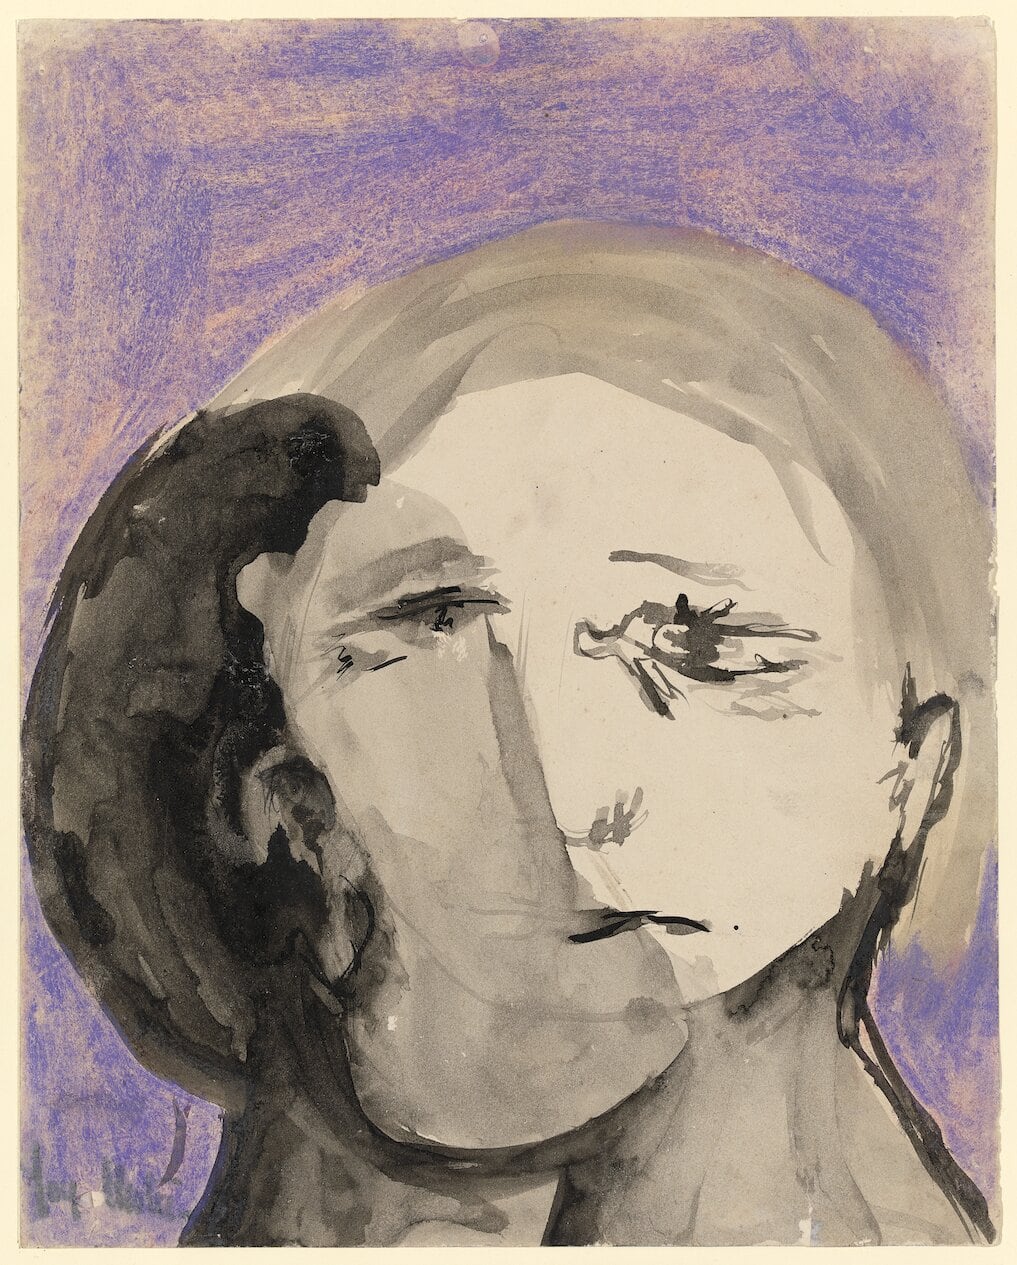 Image 01: Joy Hester, Untitled (From the Love series), 1949, brush and ink and mauve pastel on paper, 31.6 x 25.2 cm. National Gallery of Victoria, Melbourne. Purchased 1976. Copyright Joy Hester/Copyright Agency 2019.